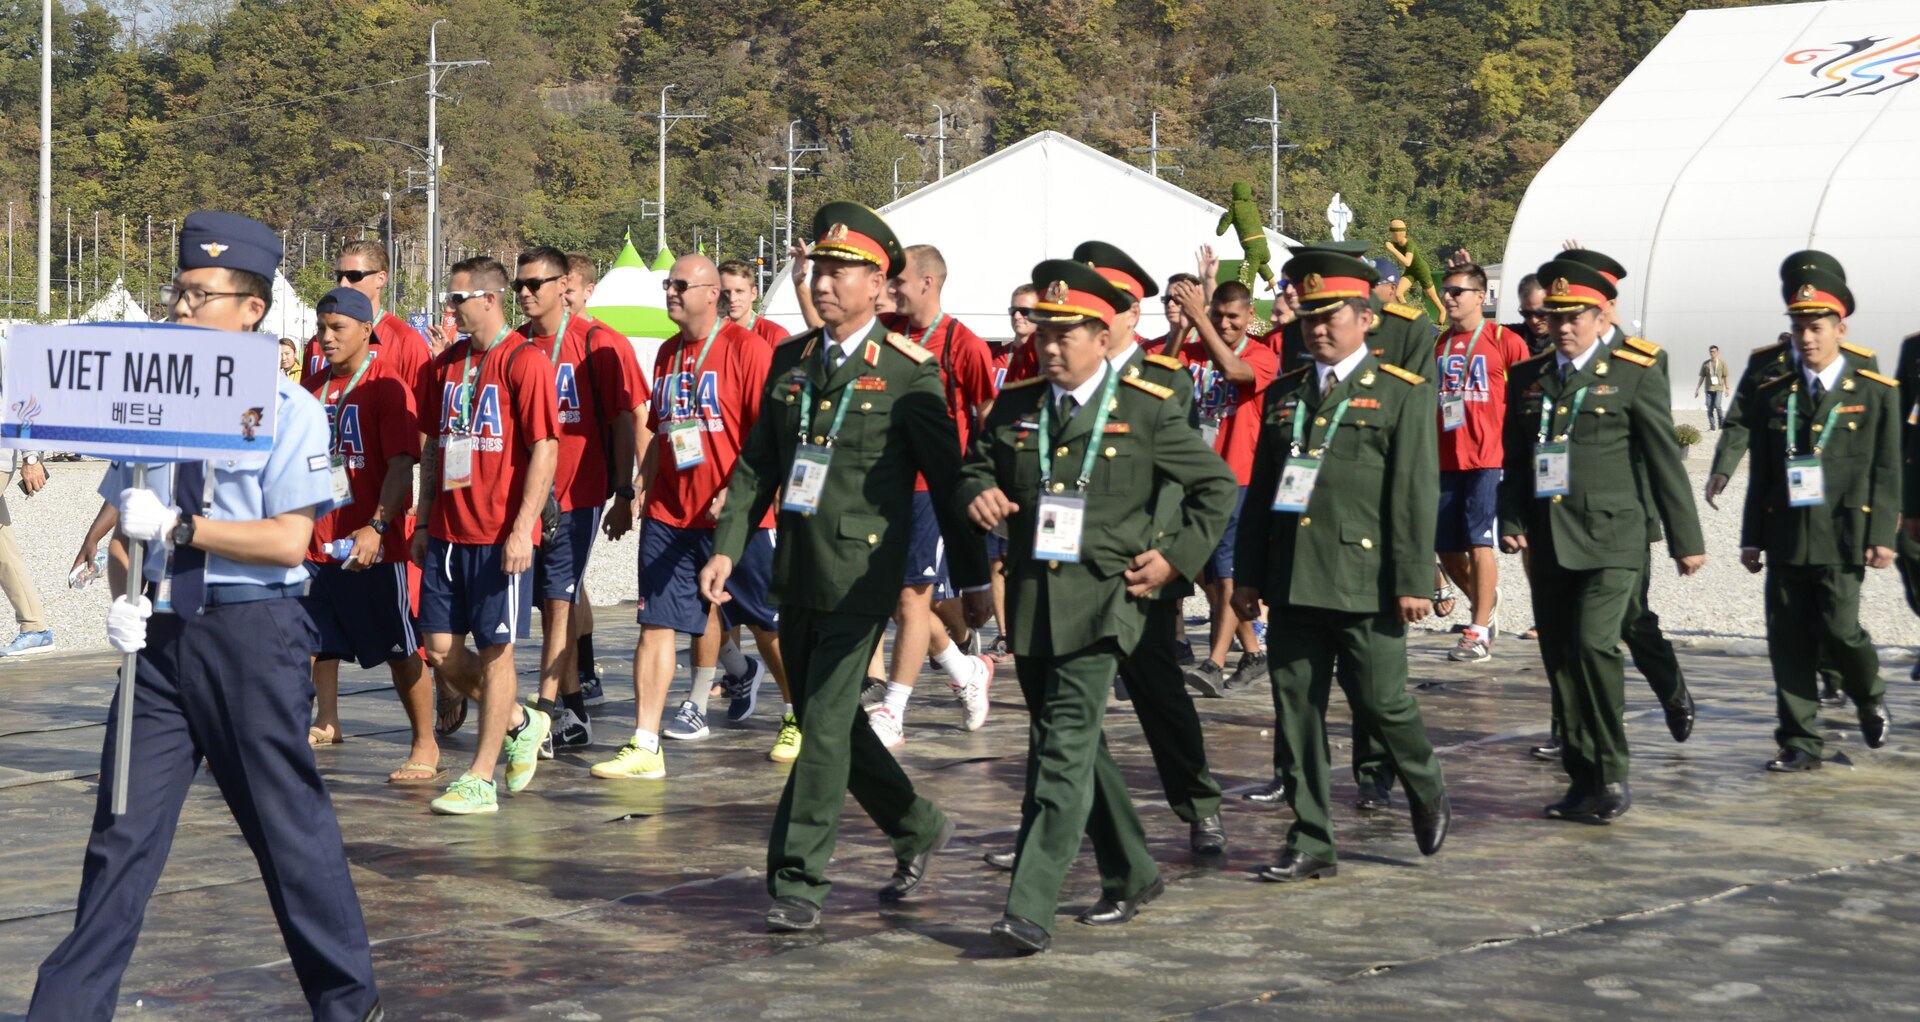 The U.S. Armed Forces Men's Soccer Team and Soldiers from the Republic of Vietnam march together into the opening ceremony of Mungyeong Athlete's Village, Sept. 29, 2015, for the CISM World Games in South Korea.